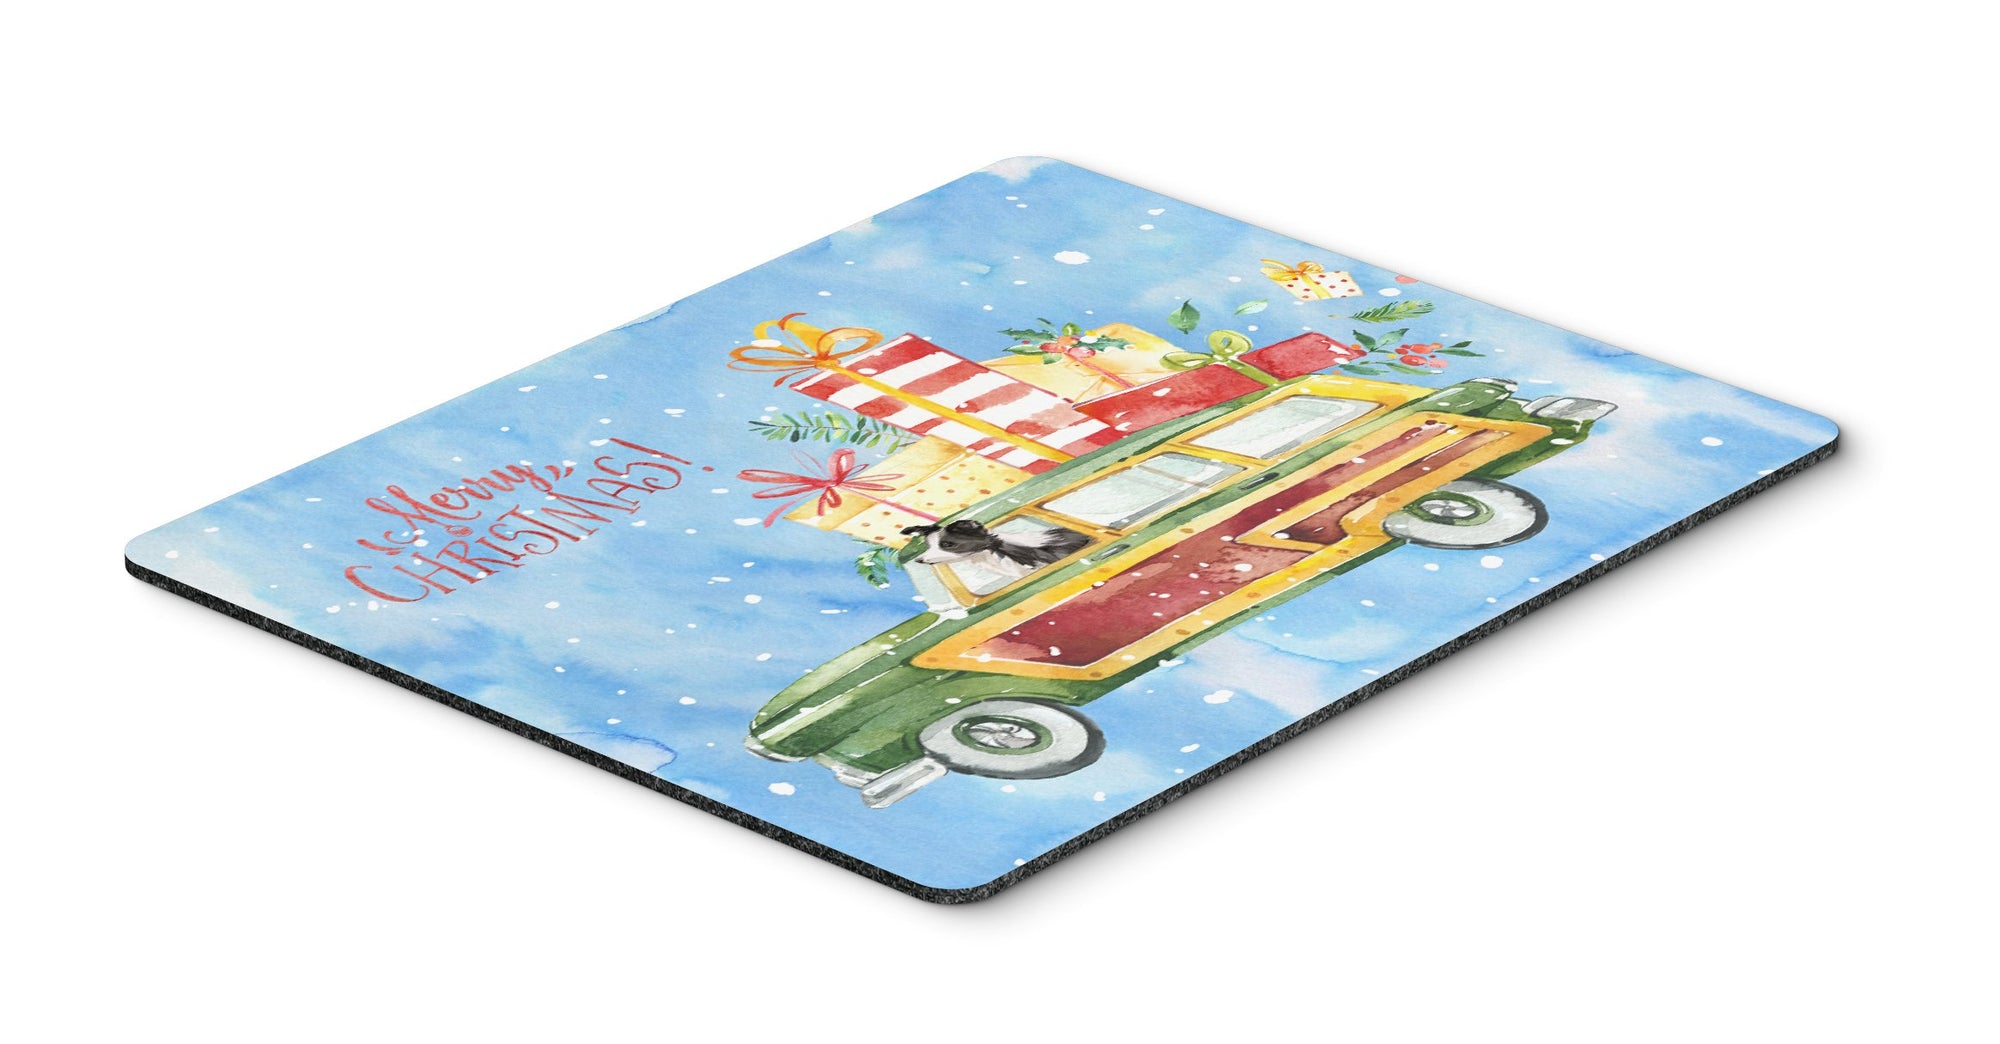 Merry Christmas Border Collie Mouse Pad, Hot Pad or Trivet CK2445MP by Caroline's Treasures